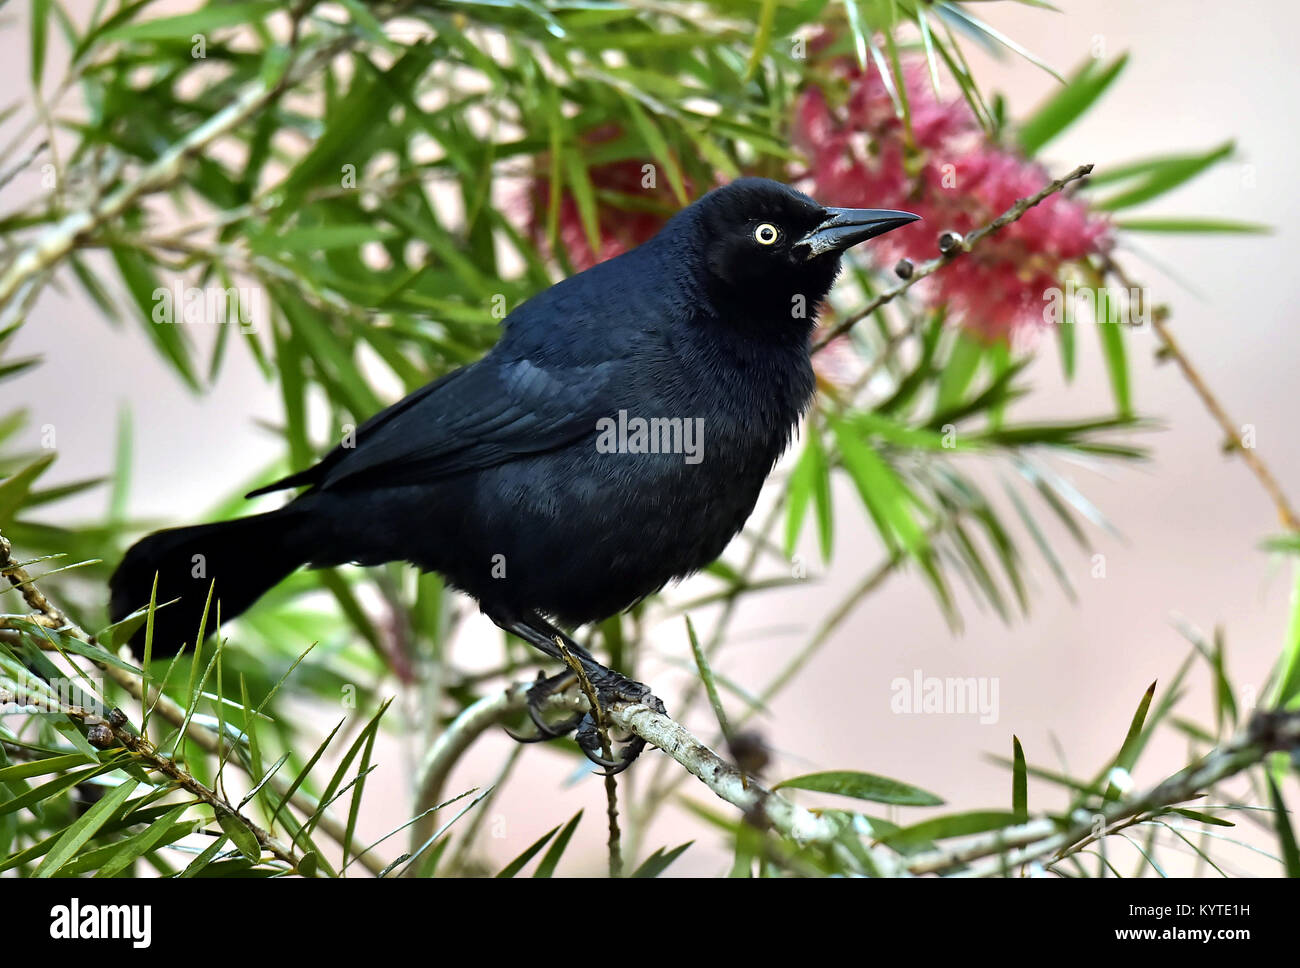 The Greater Antillean grackle (Quiscalus niger) perched on branch at La Boca, Republic of Cuba in March Stock Photo